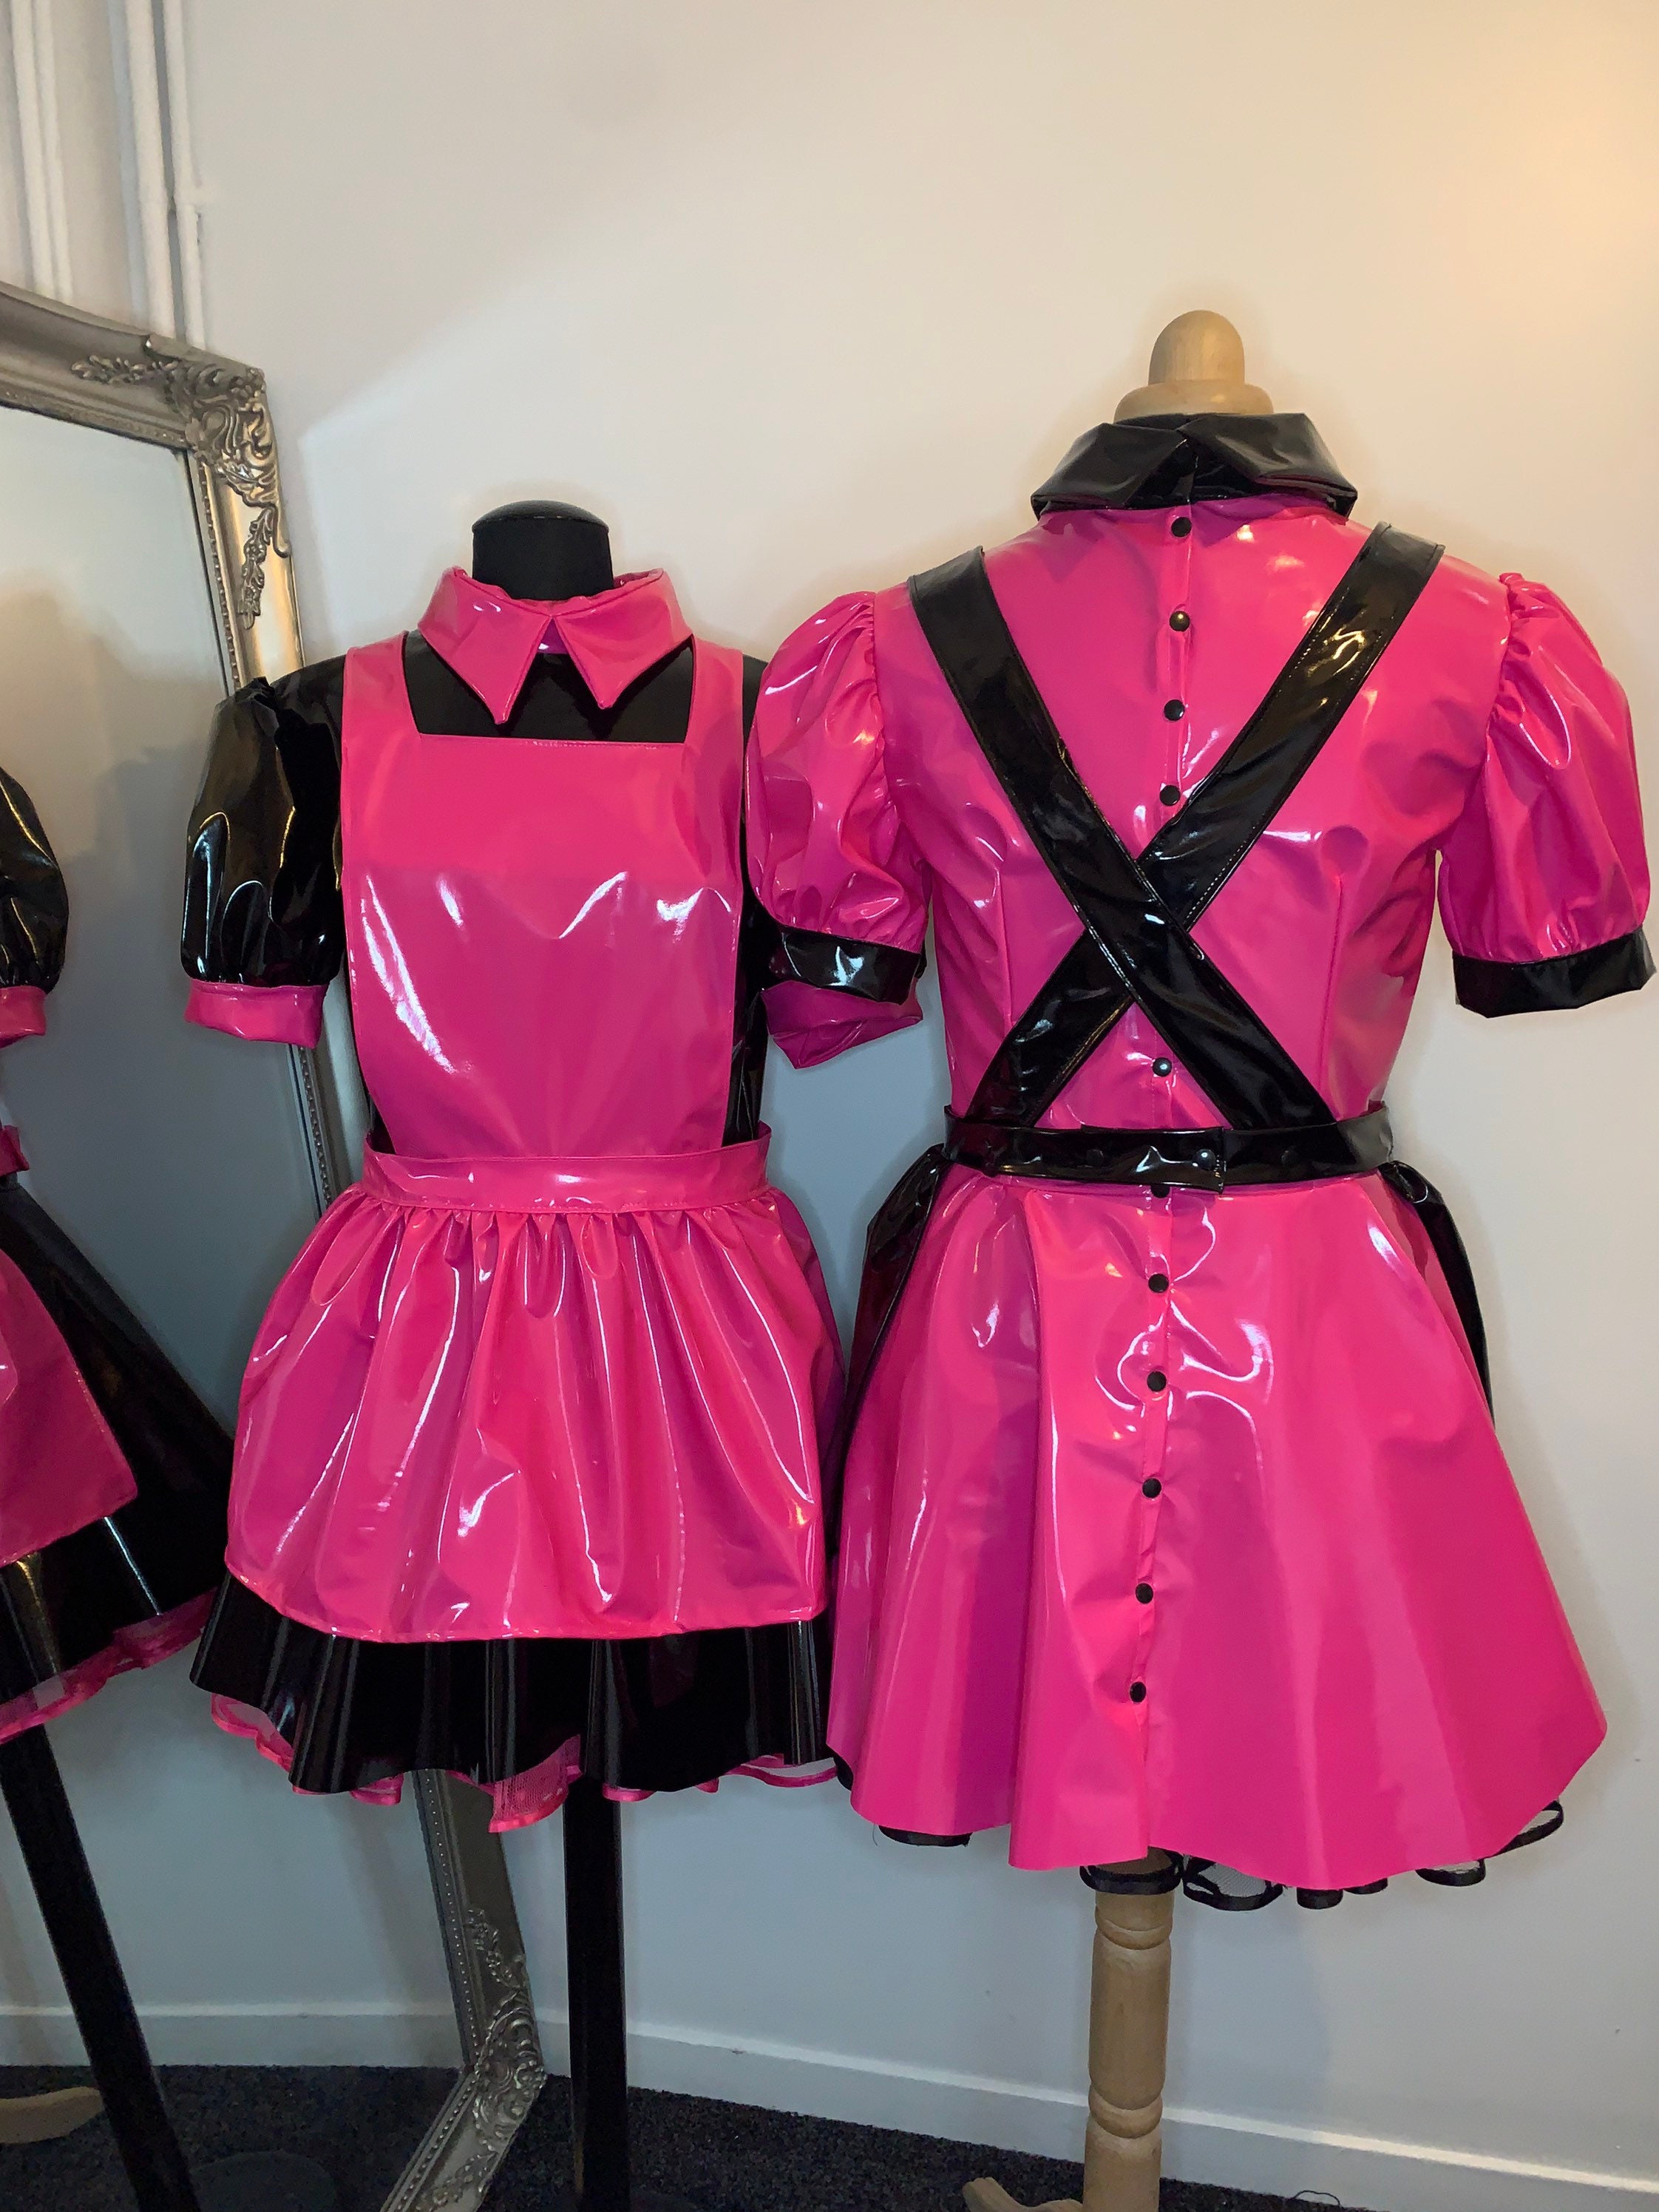 PVC Maids Uniform With Detachable Apron and Contrasting Netted